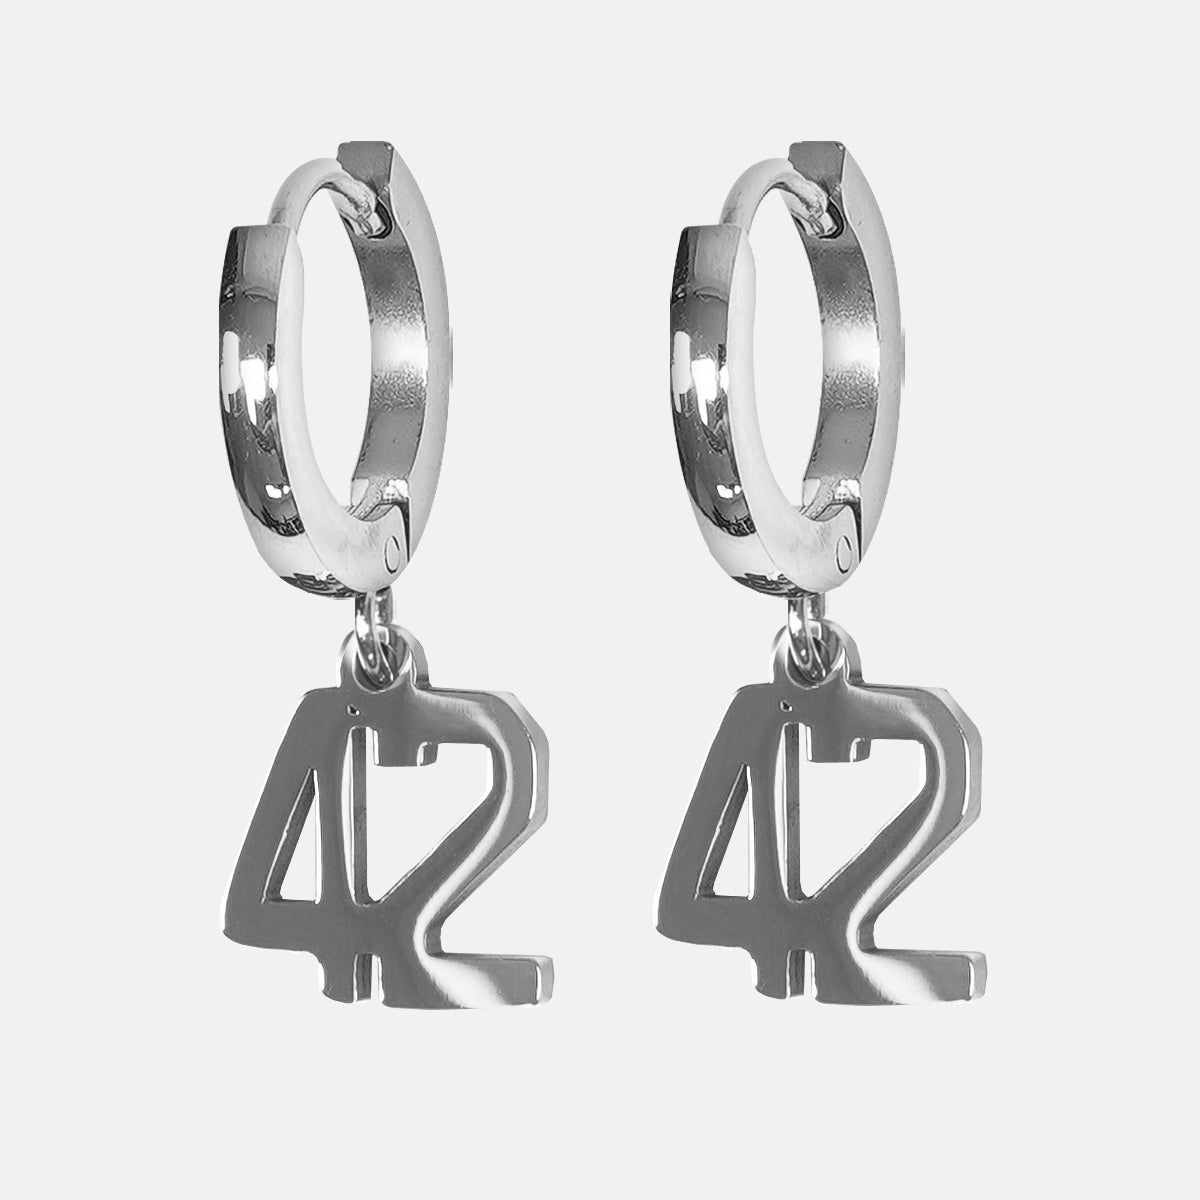 42 Number Earring - Stainless Steel